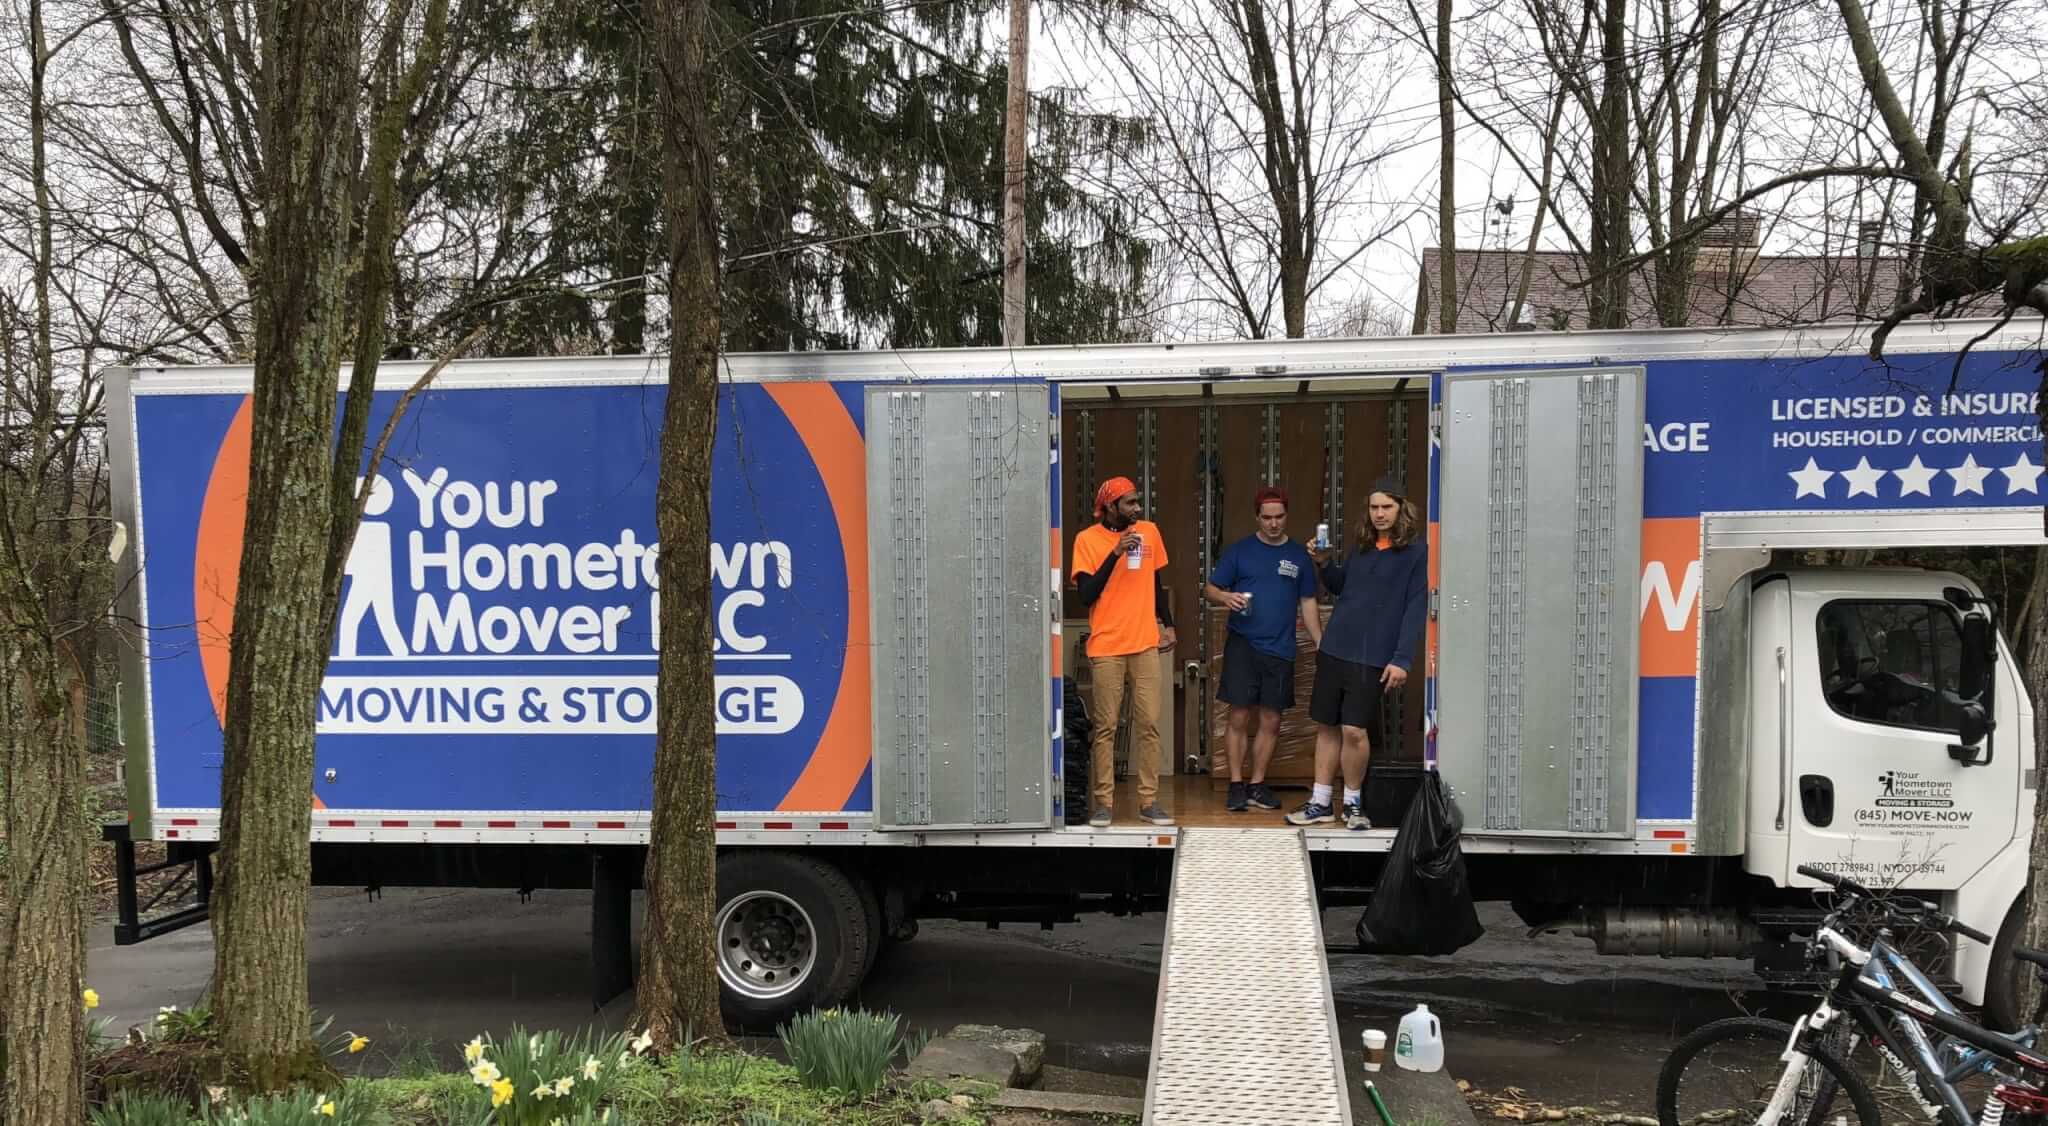 Why you should book movers in advance